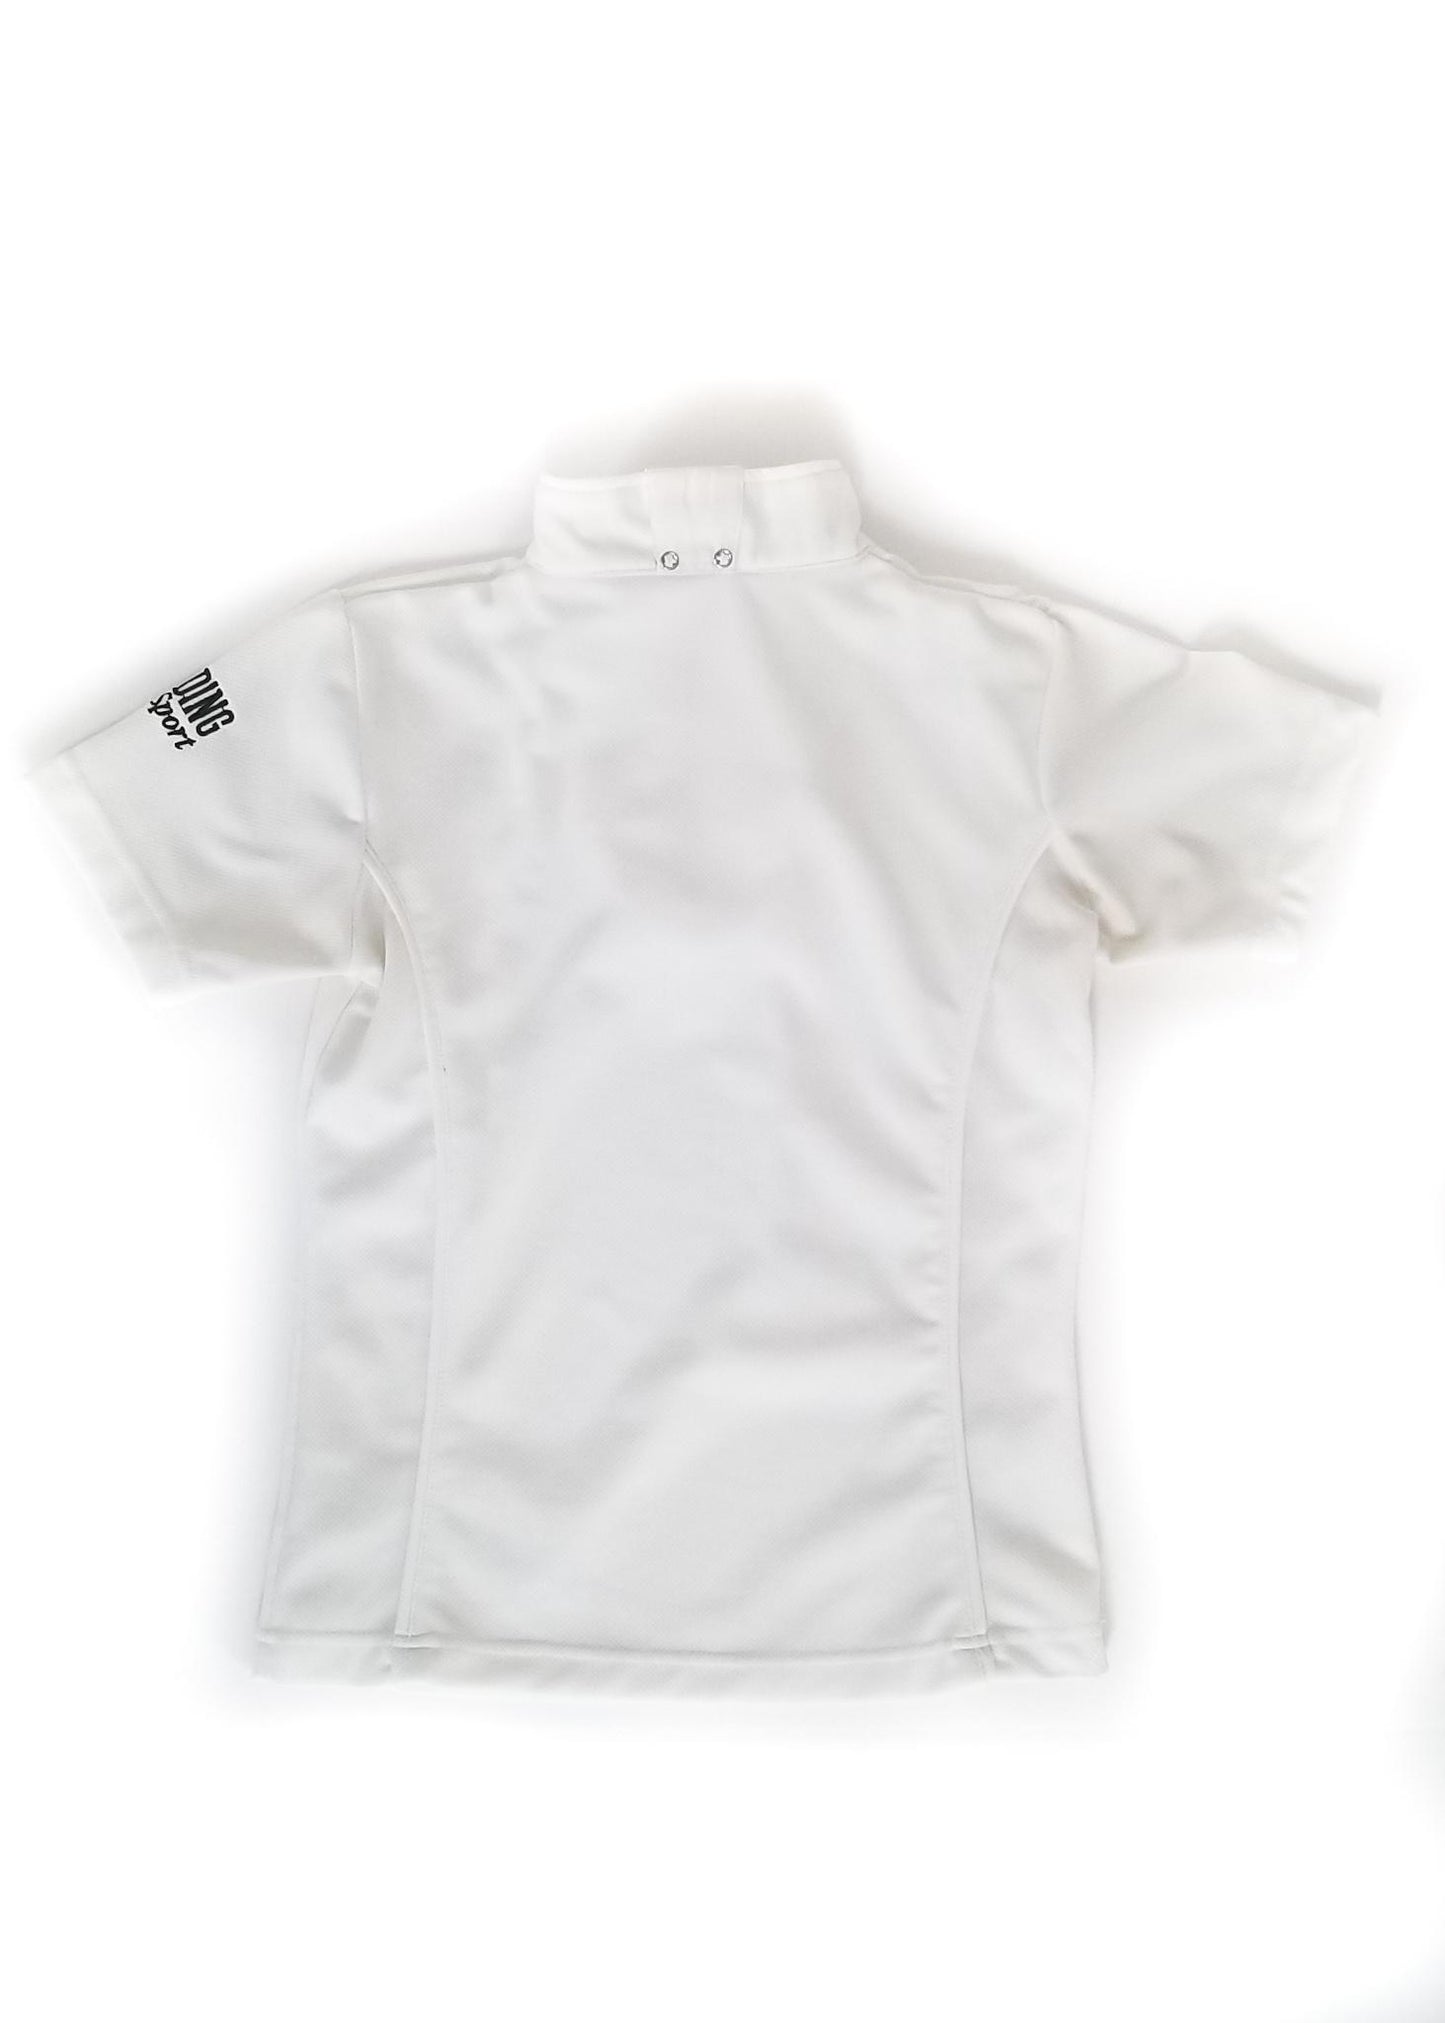 Riding Sport by Dover Short Sleeve Competition Shirt - White - Women's Medium